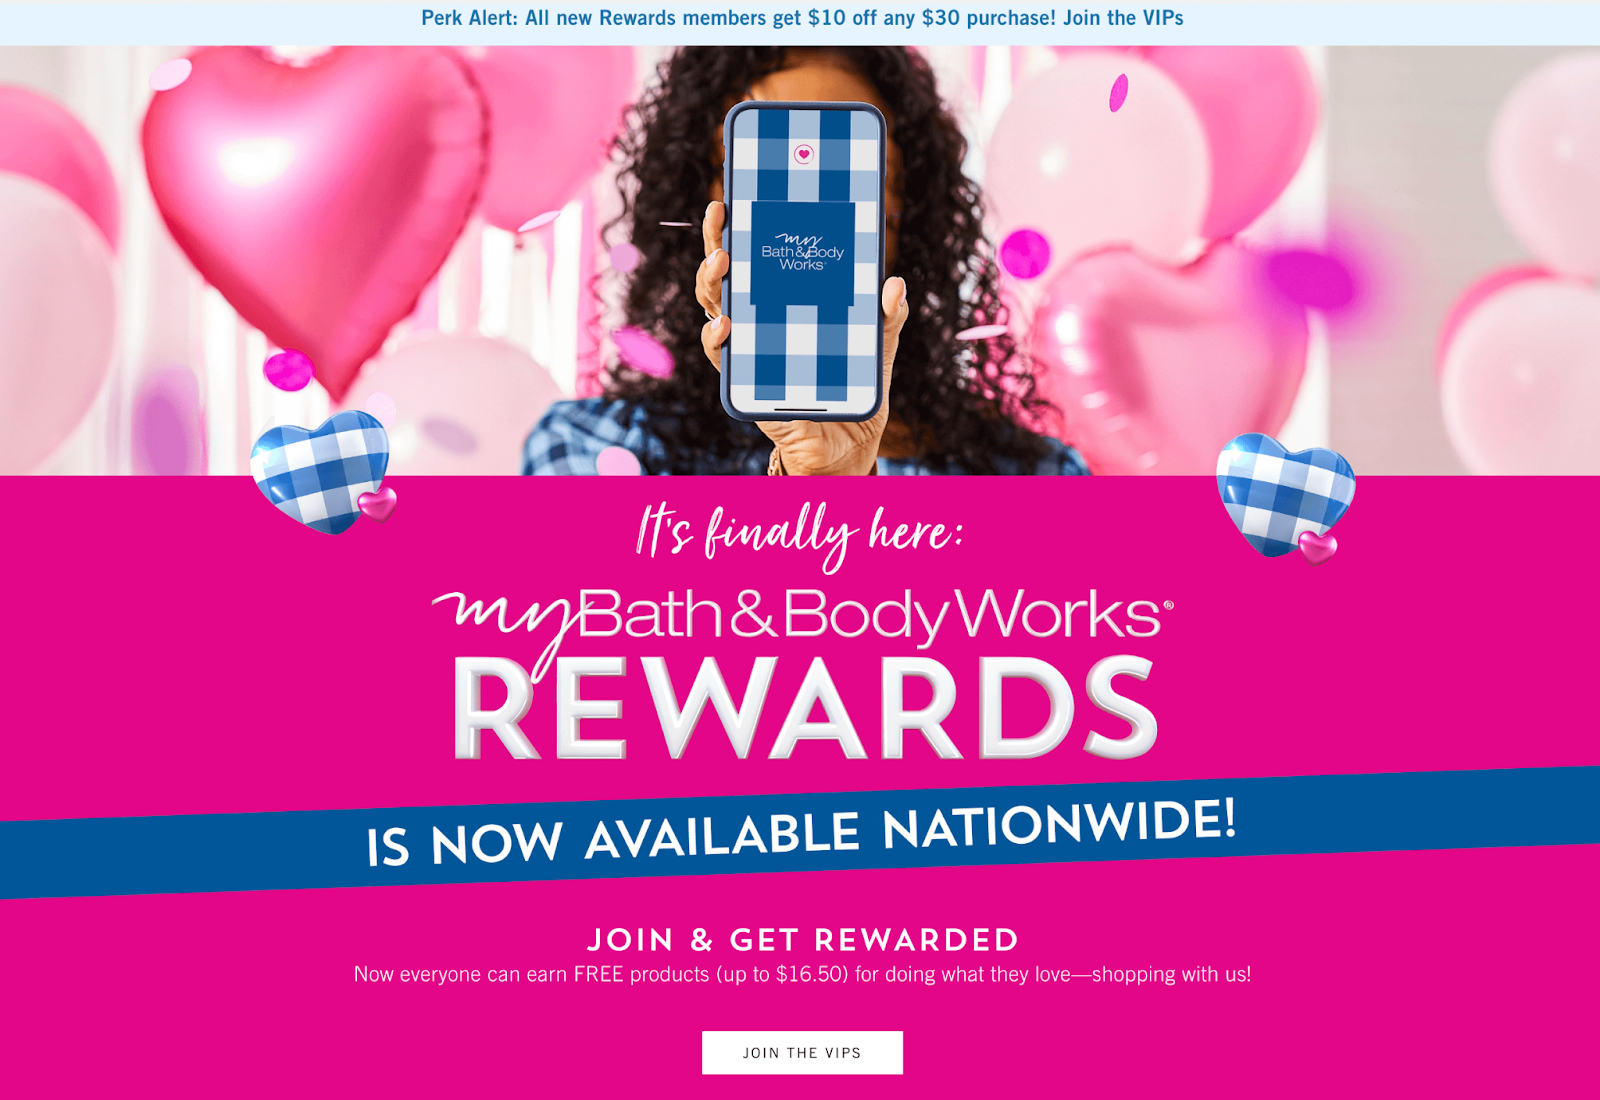 Top 10 Loyalty Programs 2022–A screenshot from Bath and Body Works loyalty program explainer page. There is an image of a woman holding a smartphone with the My Bath and Body Works app open. Below, on a pink background, the text reads,” It’s finally here: My Bath and Body Works Rewards is now available nationwide! Join and get rewarded. Now everyone can earn FREE products (up to $16.50) for doing what they love–shopping with us.” There is a white button underneath that says ‘Join the VIPs’. 